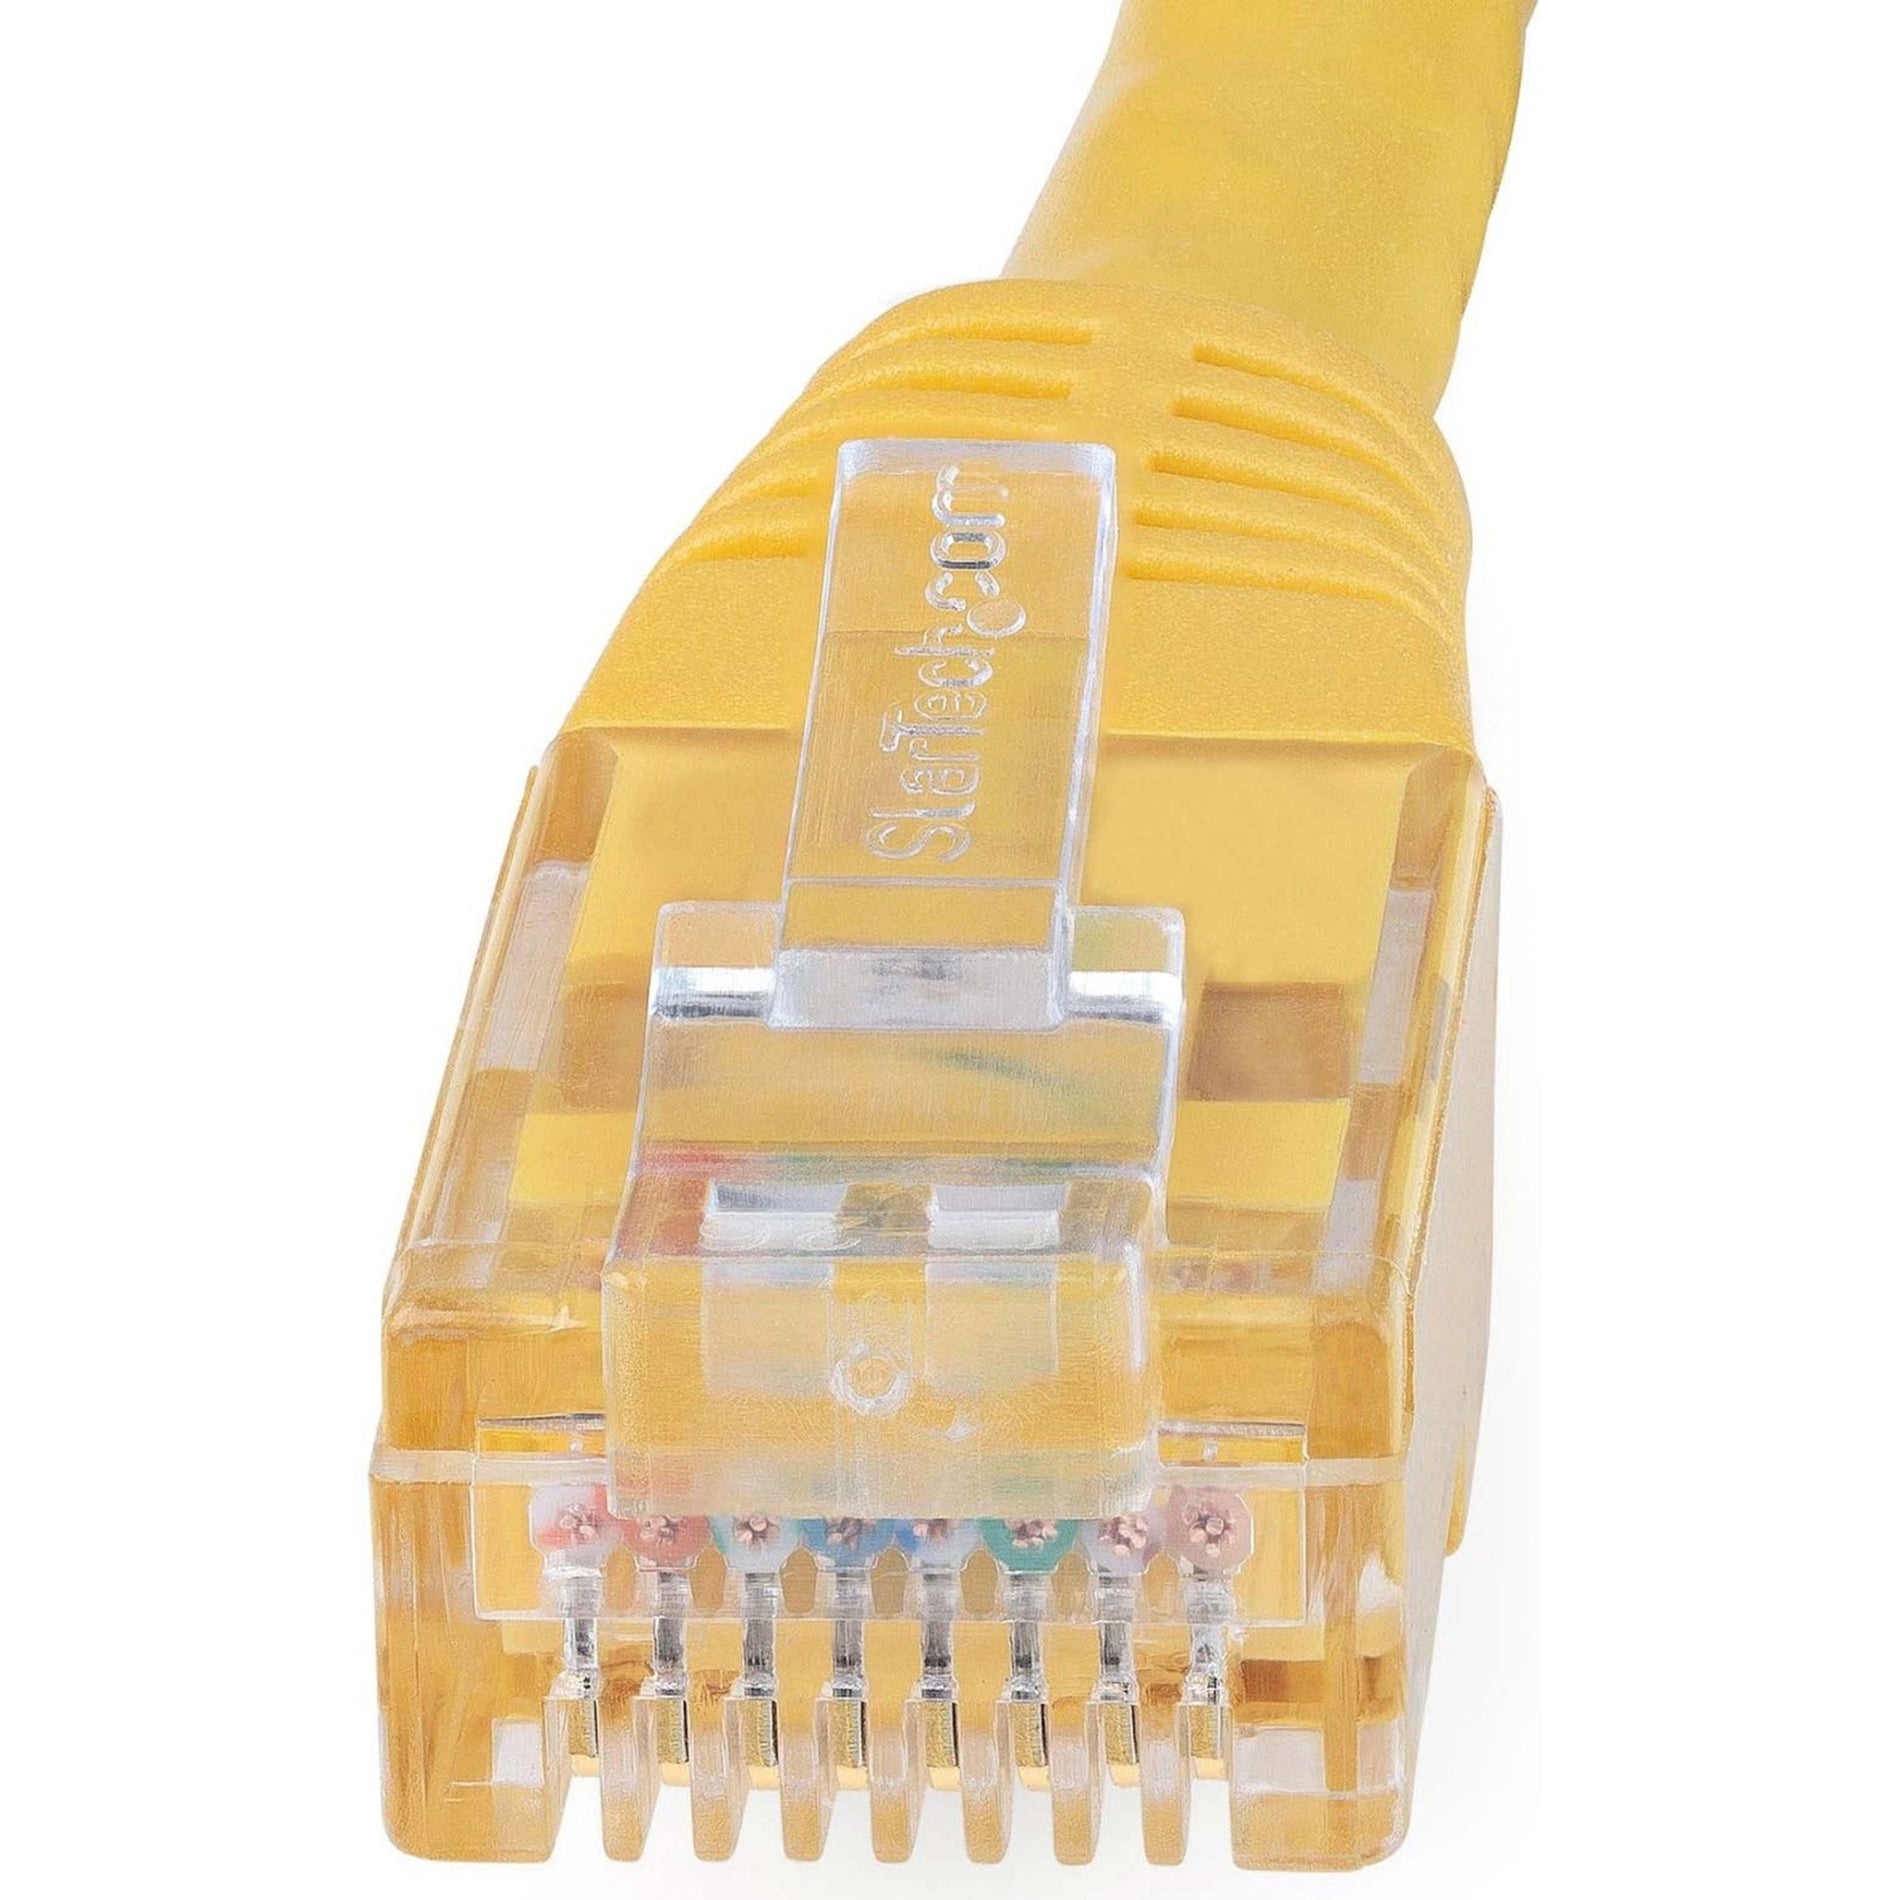 StarTech.com C6PATCH15YL 15ft Yellow Cat6 UTP Patch Cable ETL Verified, 10 Gbit/s Data Transfer Rate, Gold Plated Connectors